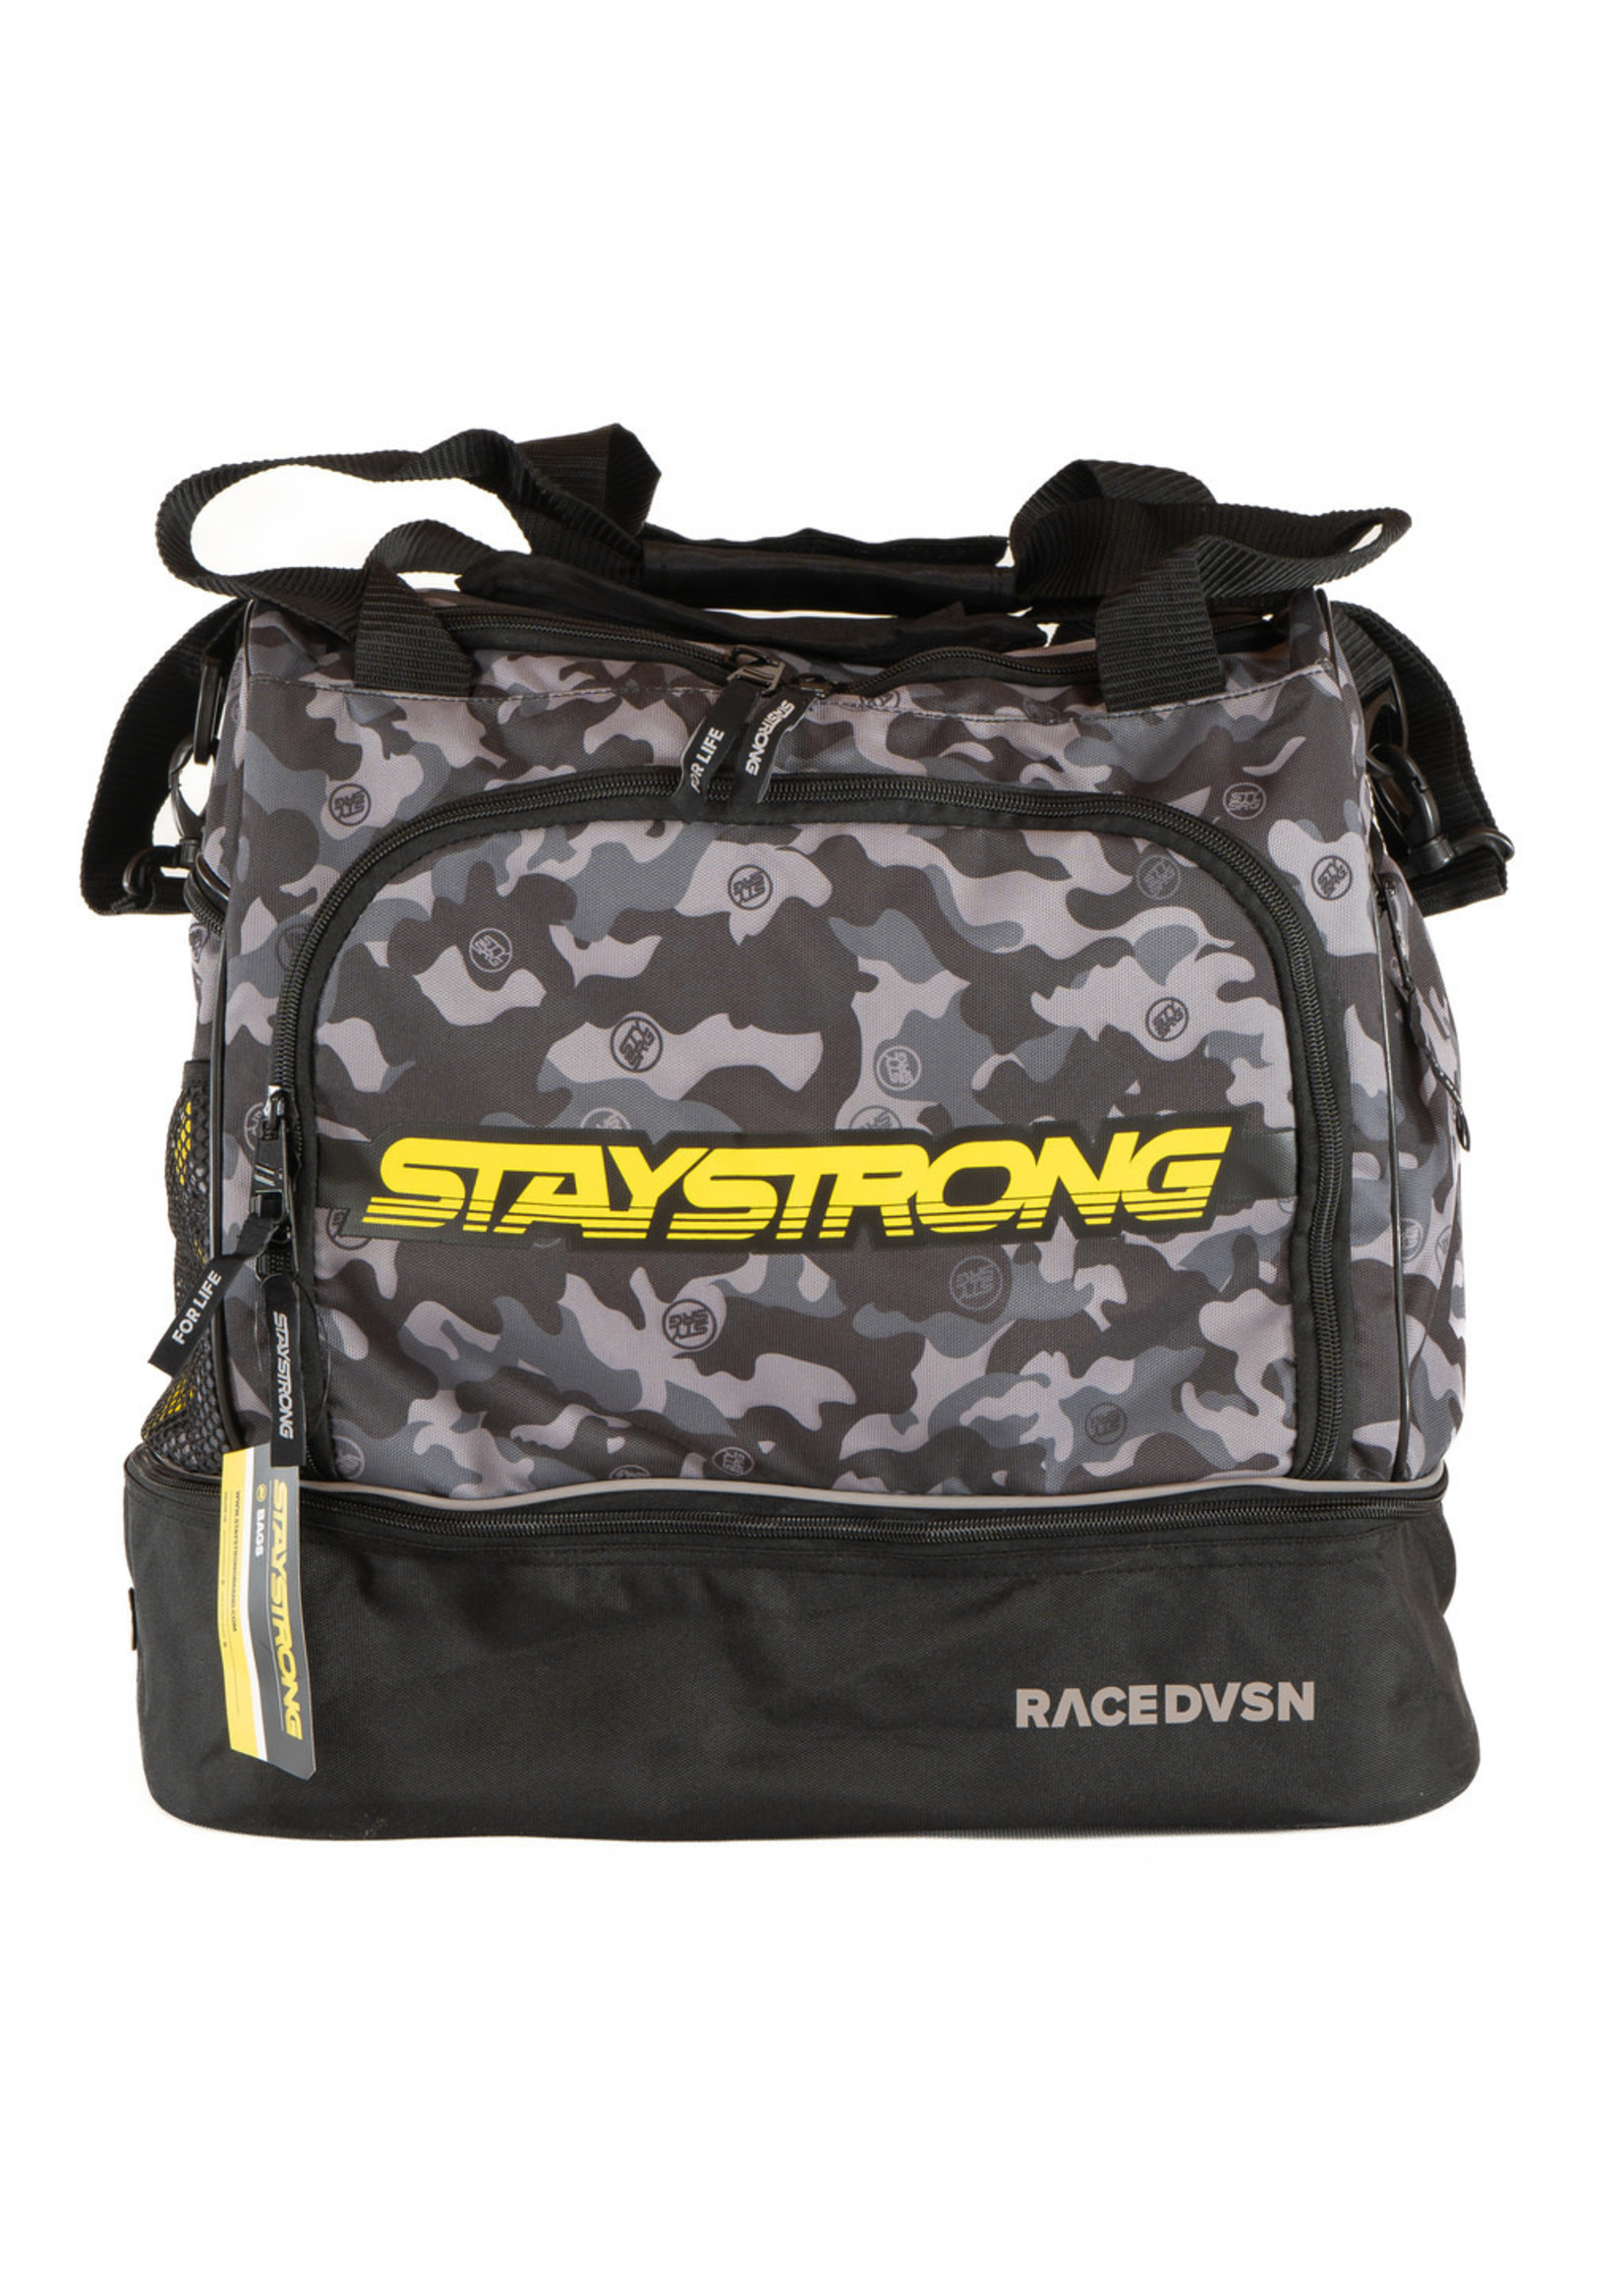 Stay Strong Bag Staystrong Chevron Helmet-Kit